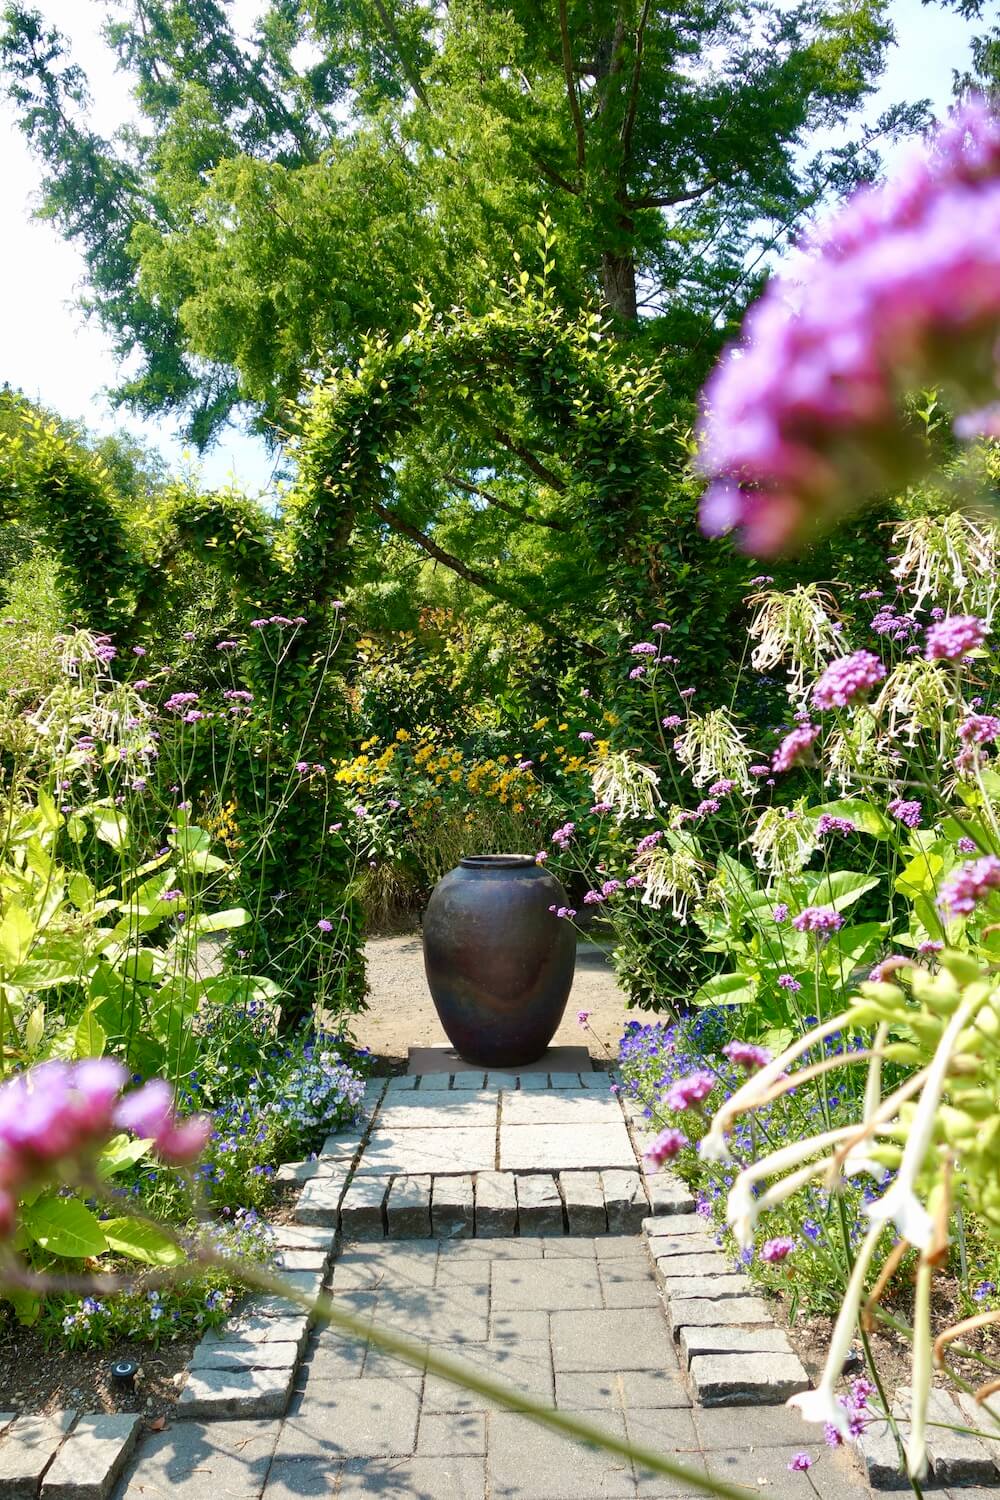 The formal garden at Heronswood near Kingston in Washington State shows elegant green arbor with purple flowers and a large copper urn centrally located amongst a stone pathway. 